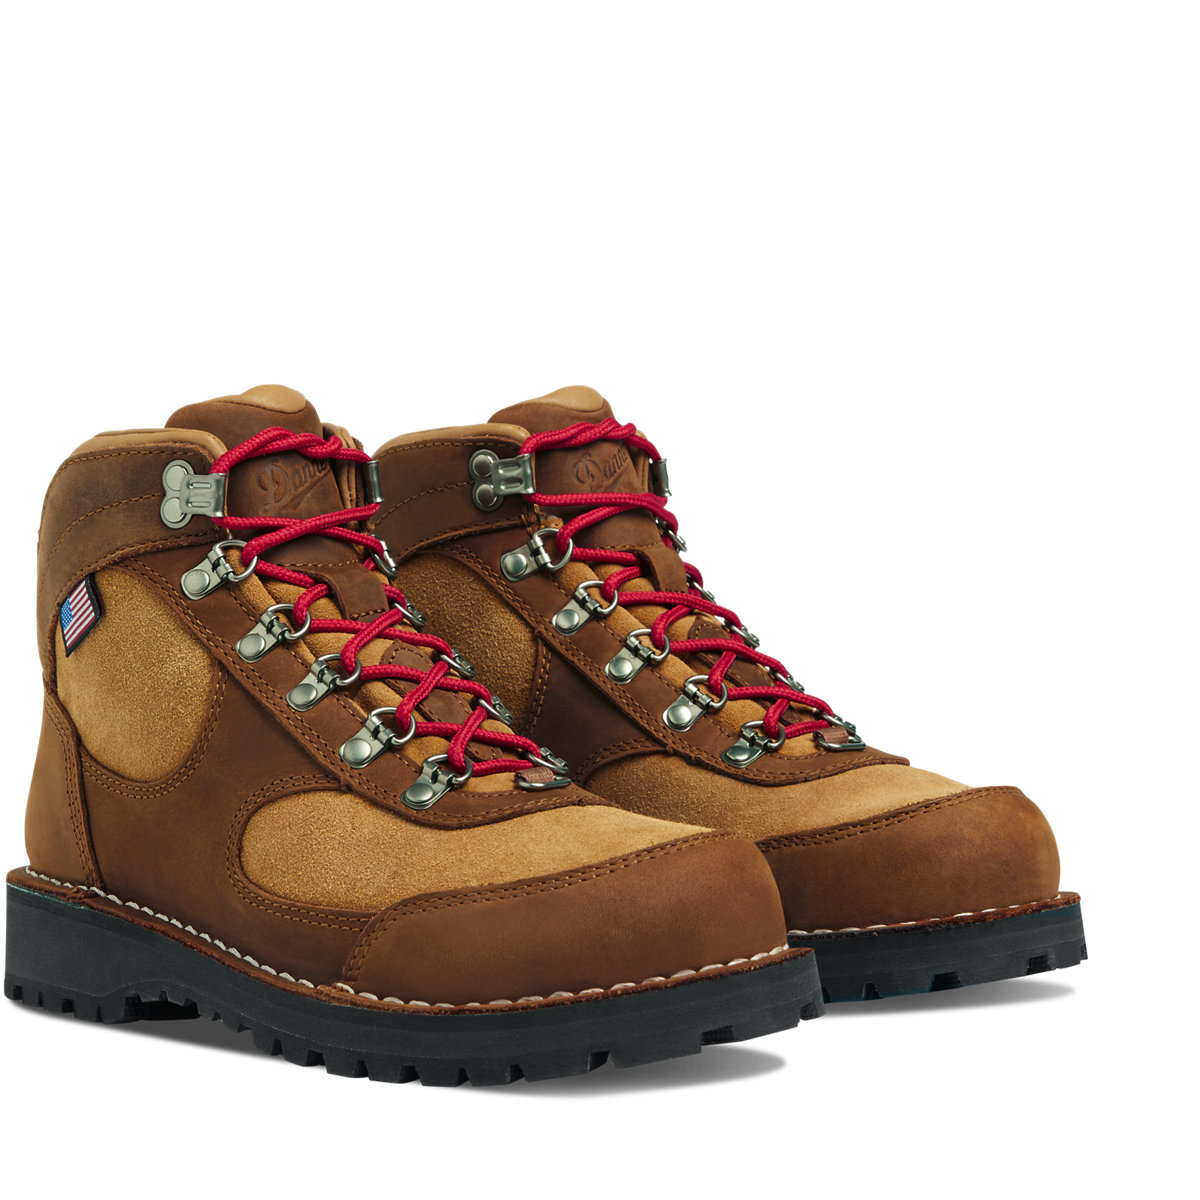 Danner - Cascade Crest Grizzly Brown/Rhodo Red